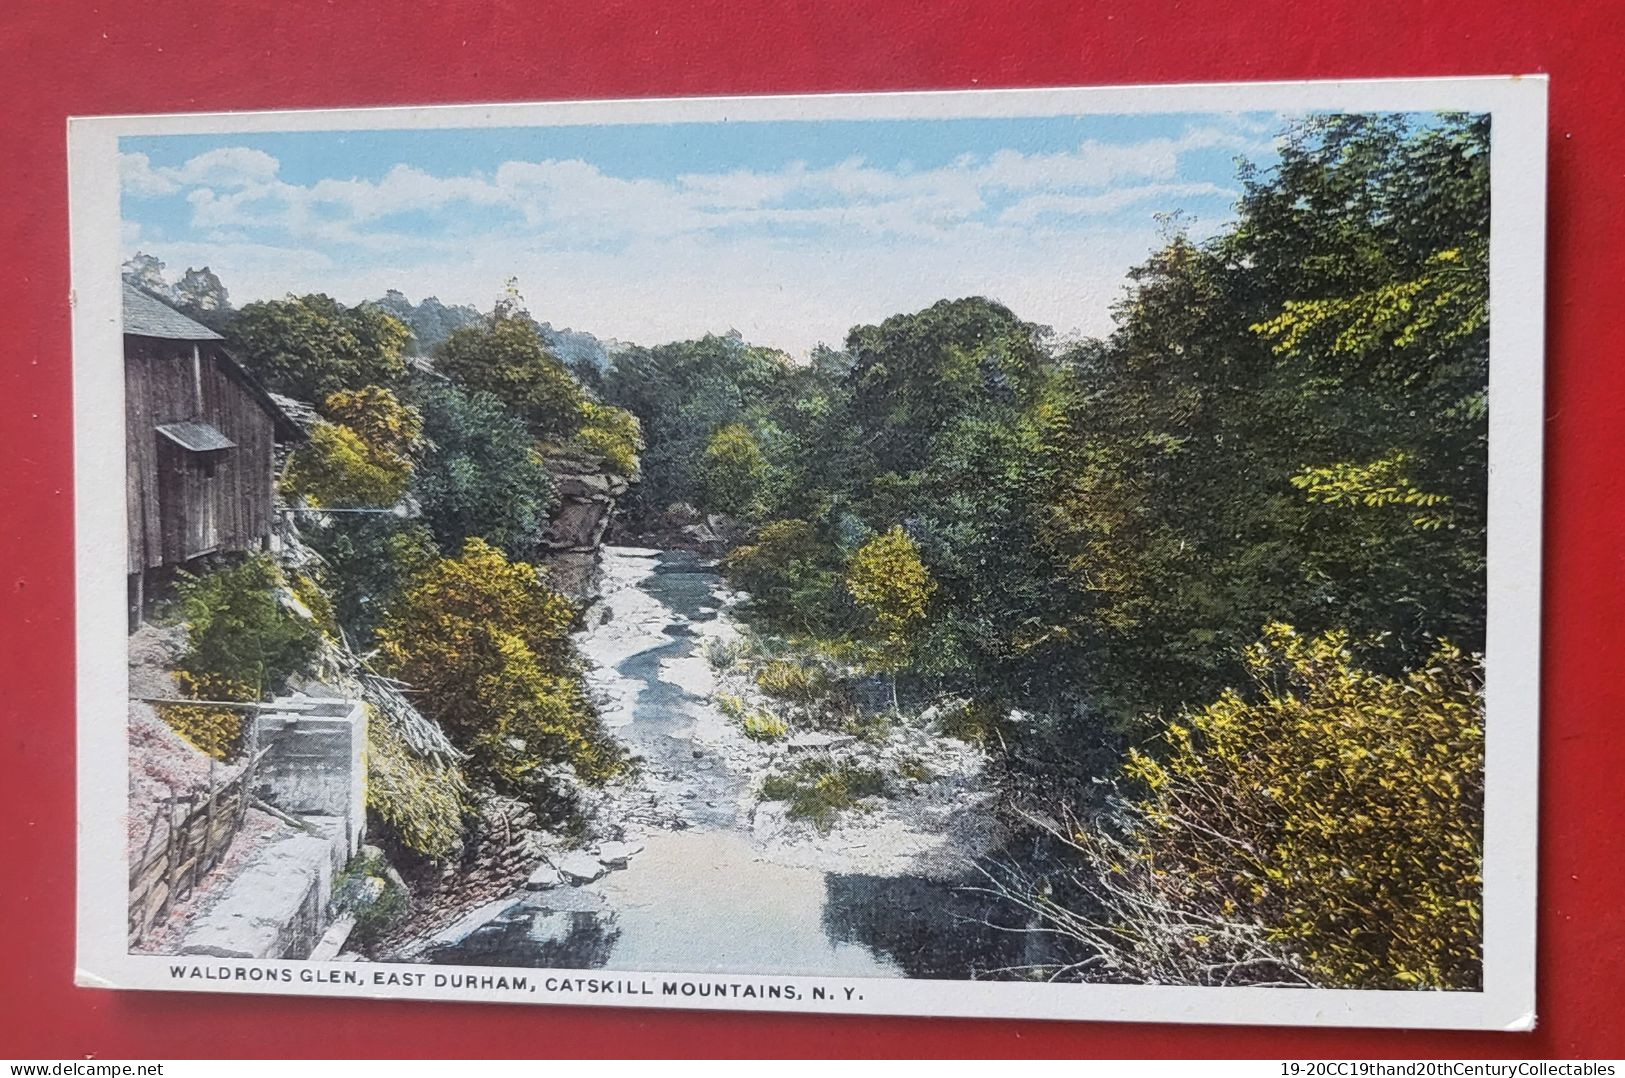 6 OLD, UNUSED CARDS OF CATSKILL MOUNTAINS, NEW YORK STATE - Catskills